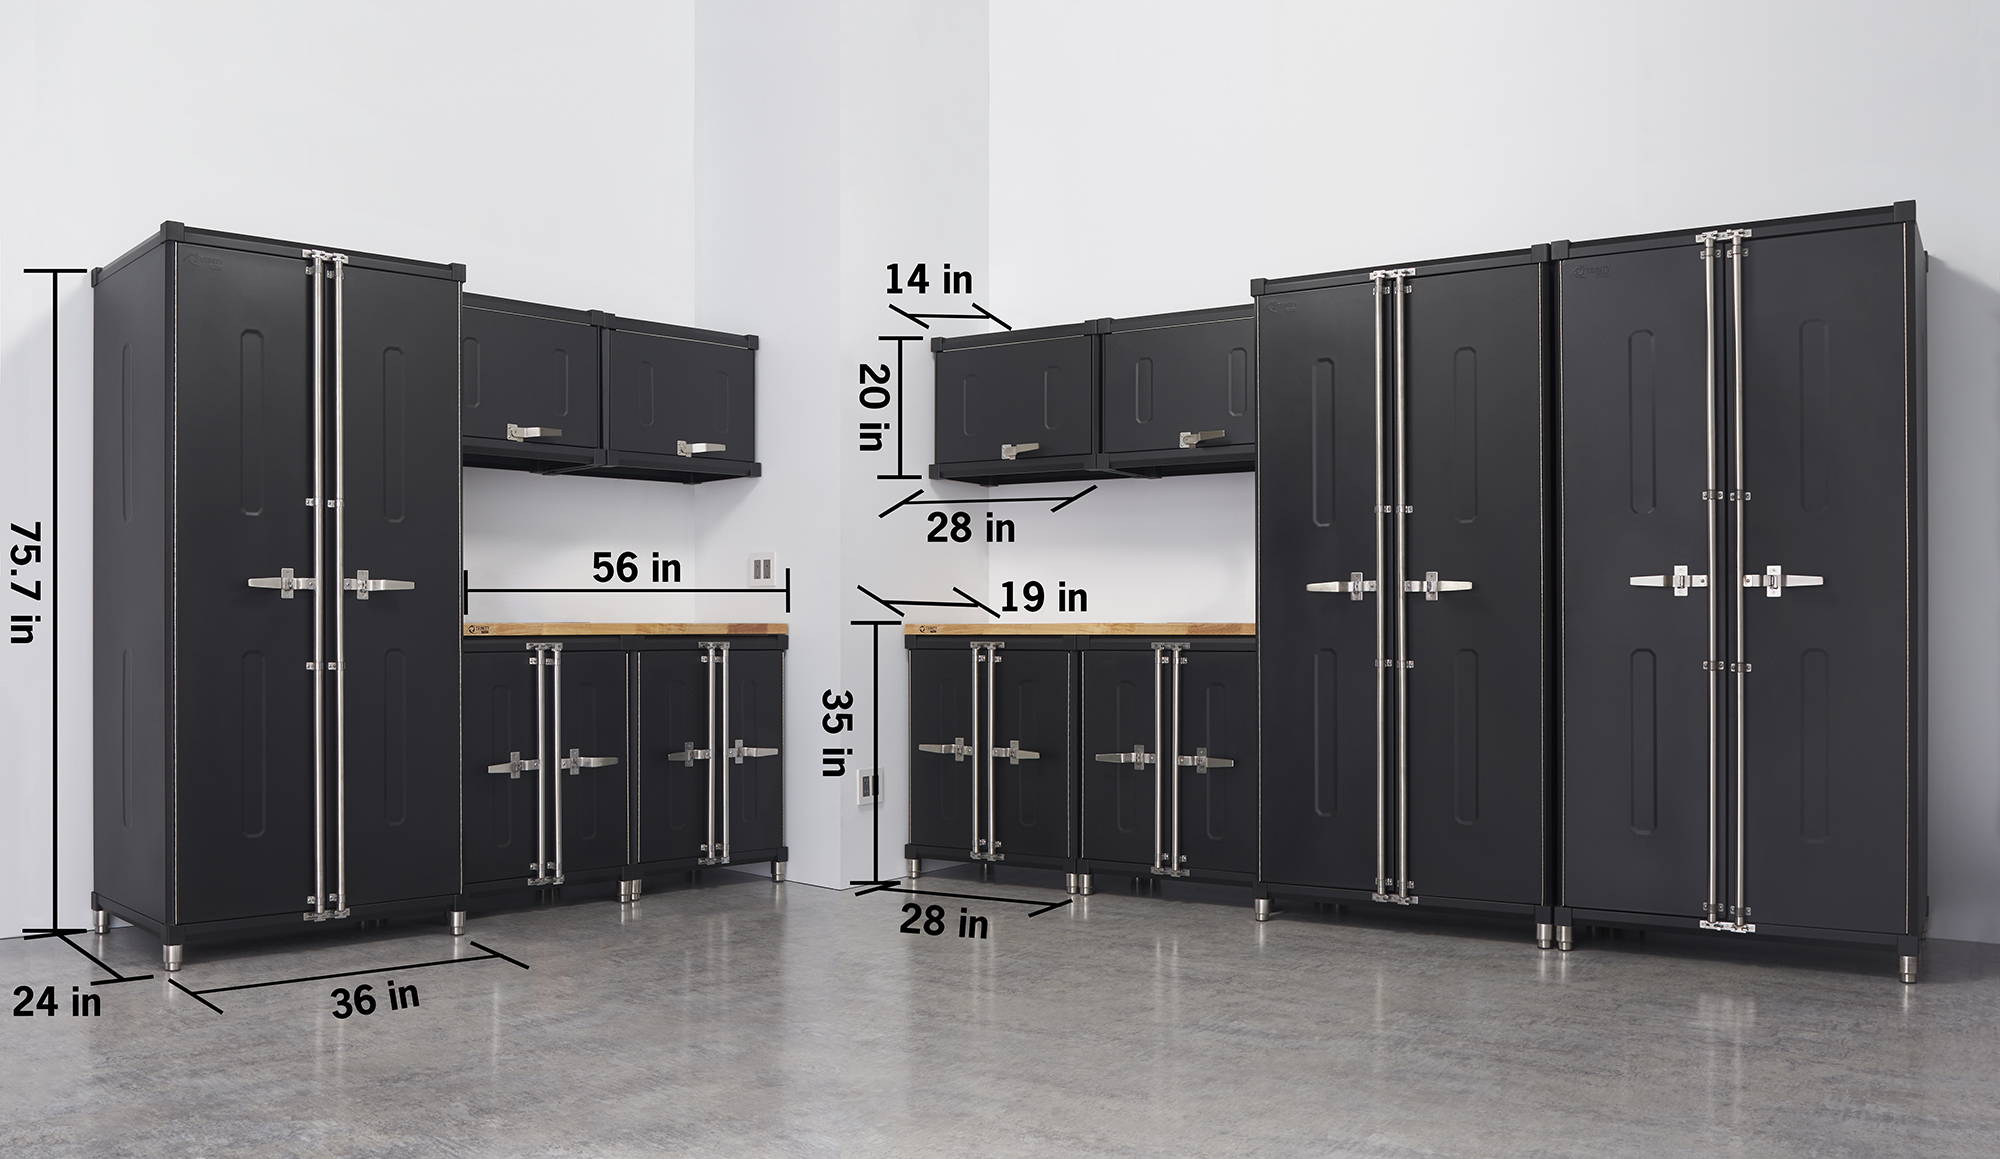 220 inches overall width of all cabinet placed side by side